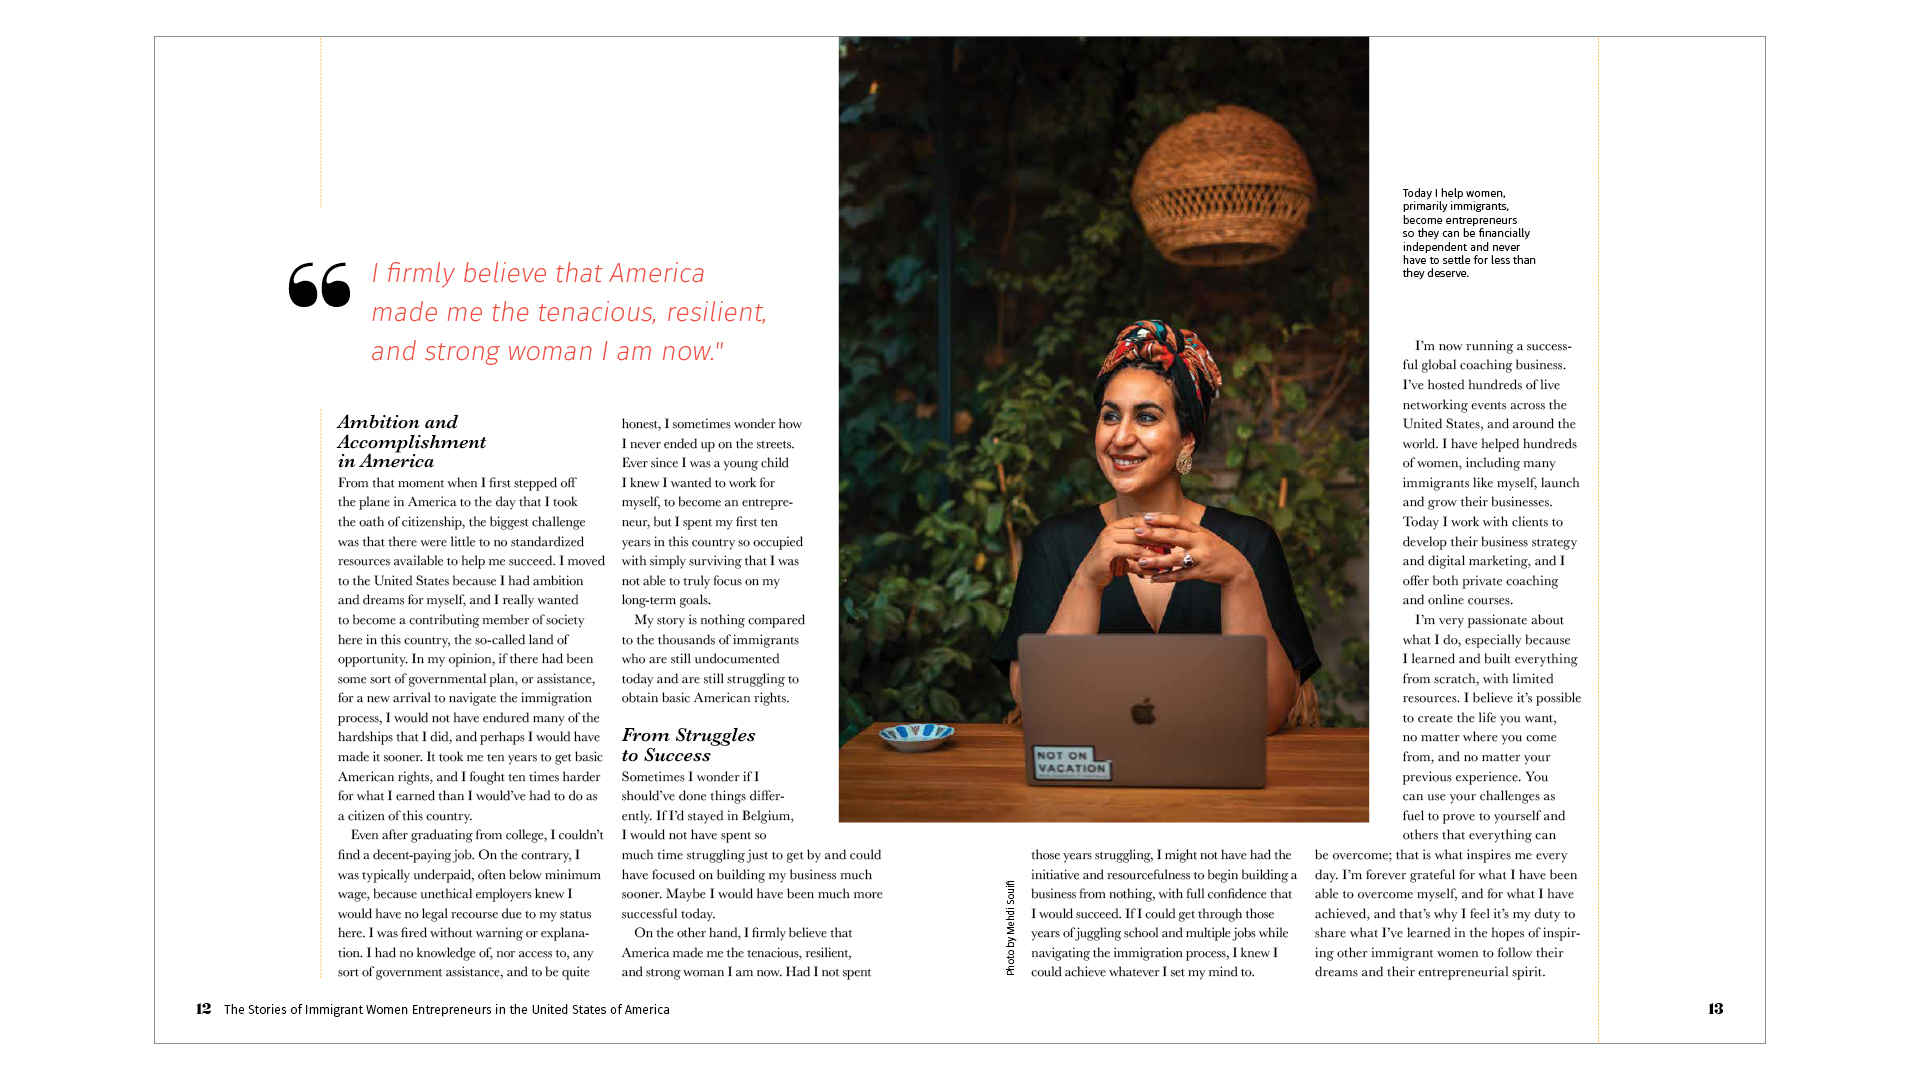 featured image two:The Stories of Immigrant Women Entrepreneurs